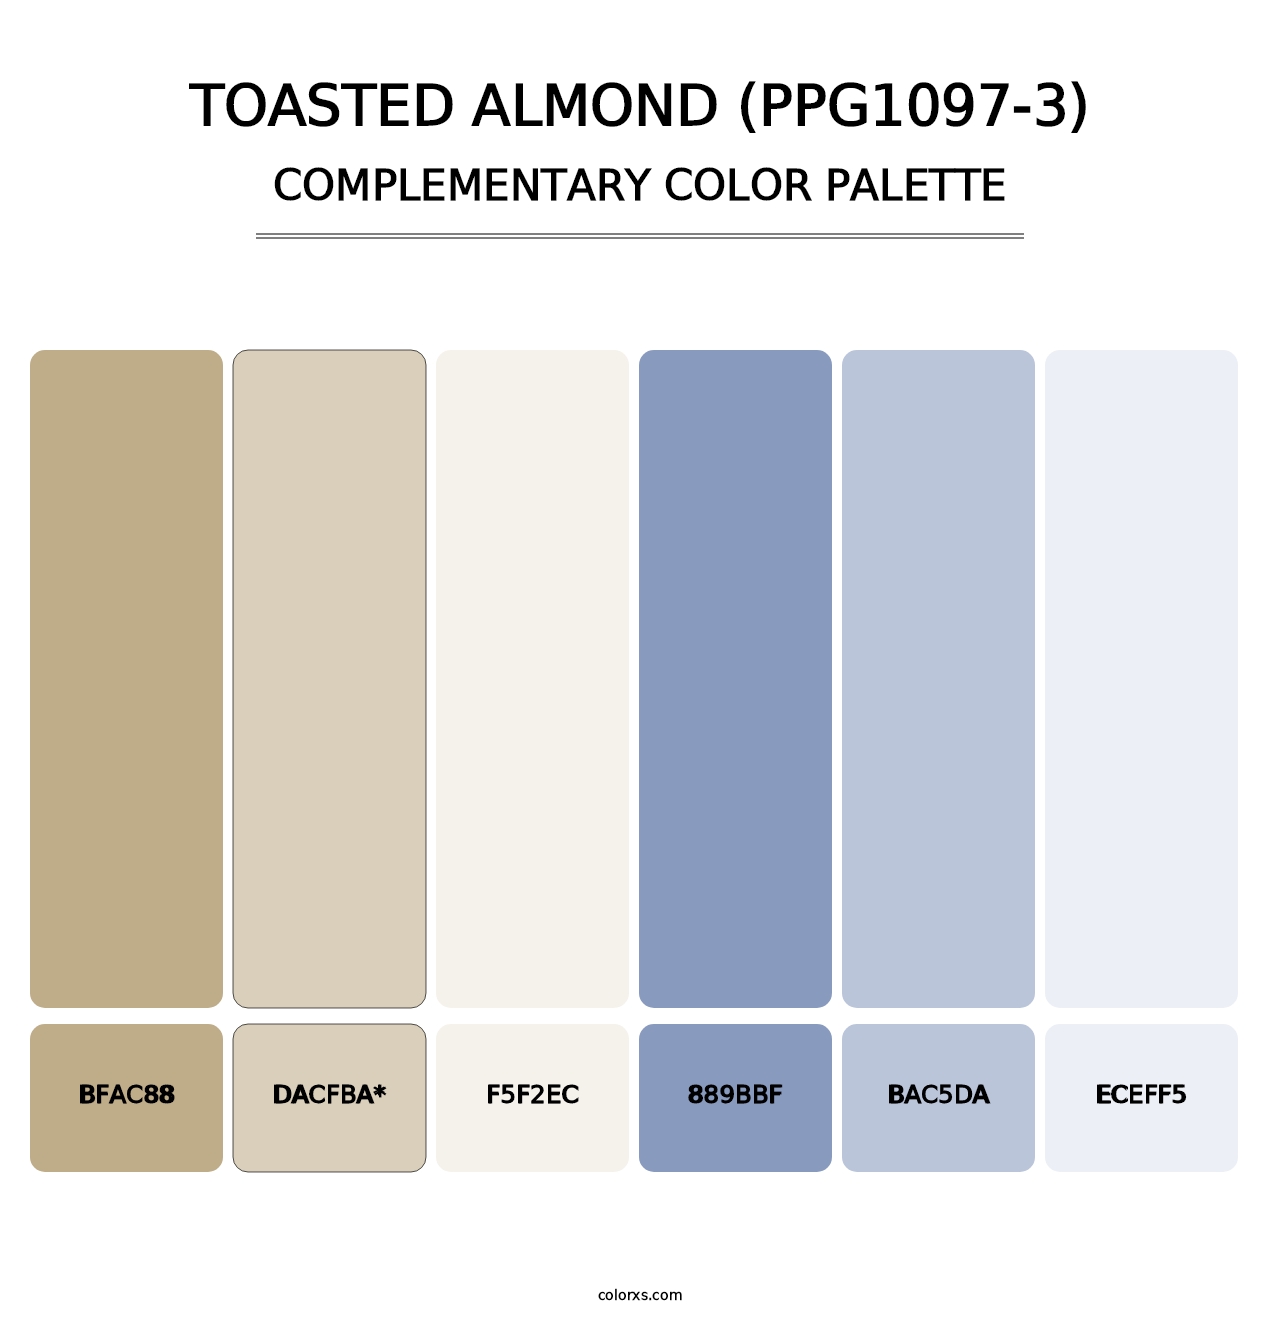 Toasted Almond (PPG1097-3) - Complementary Color Palette